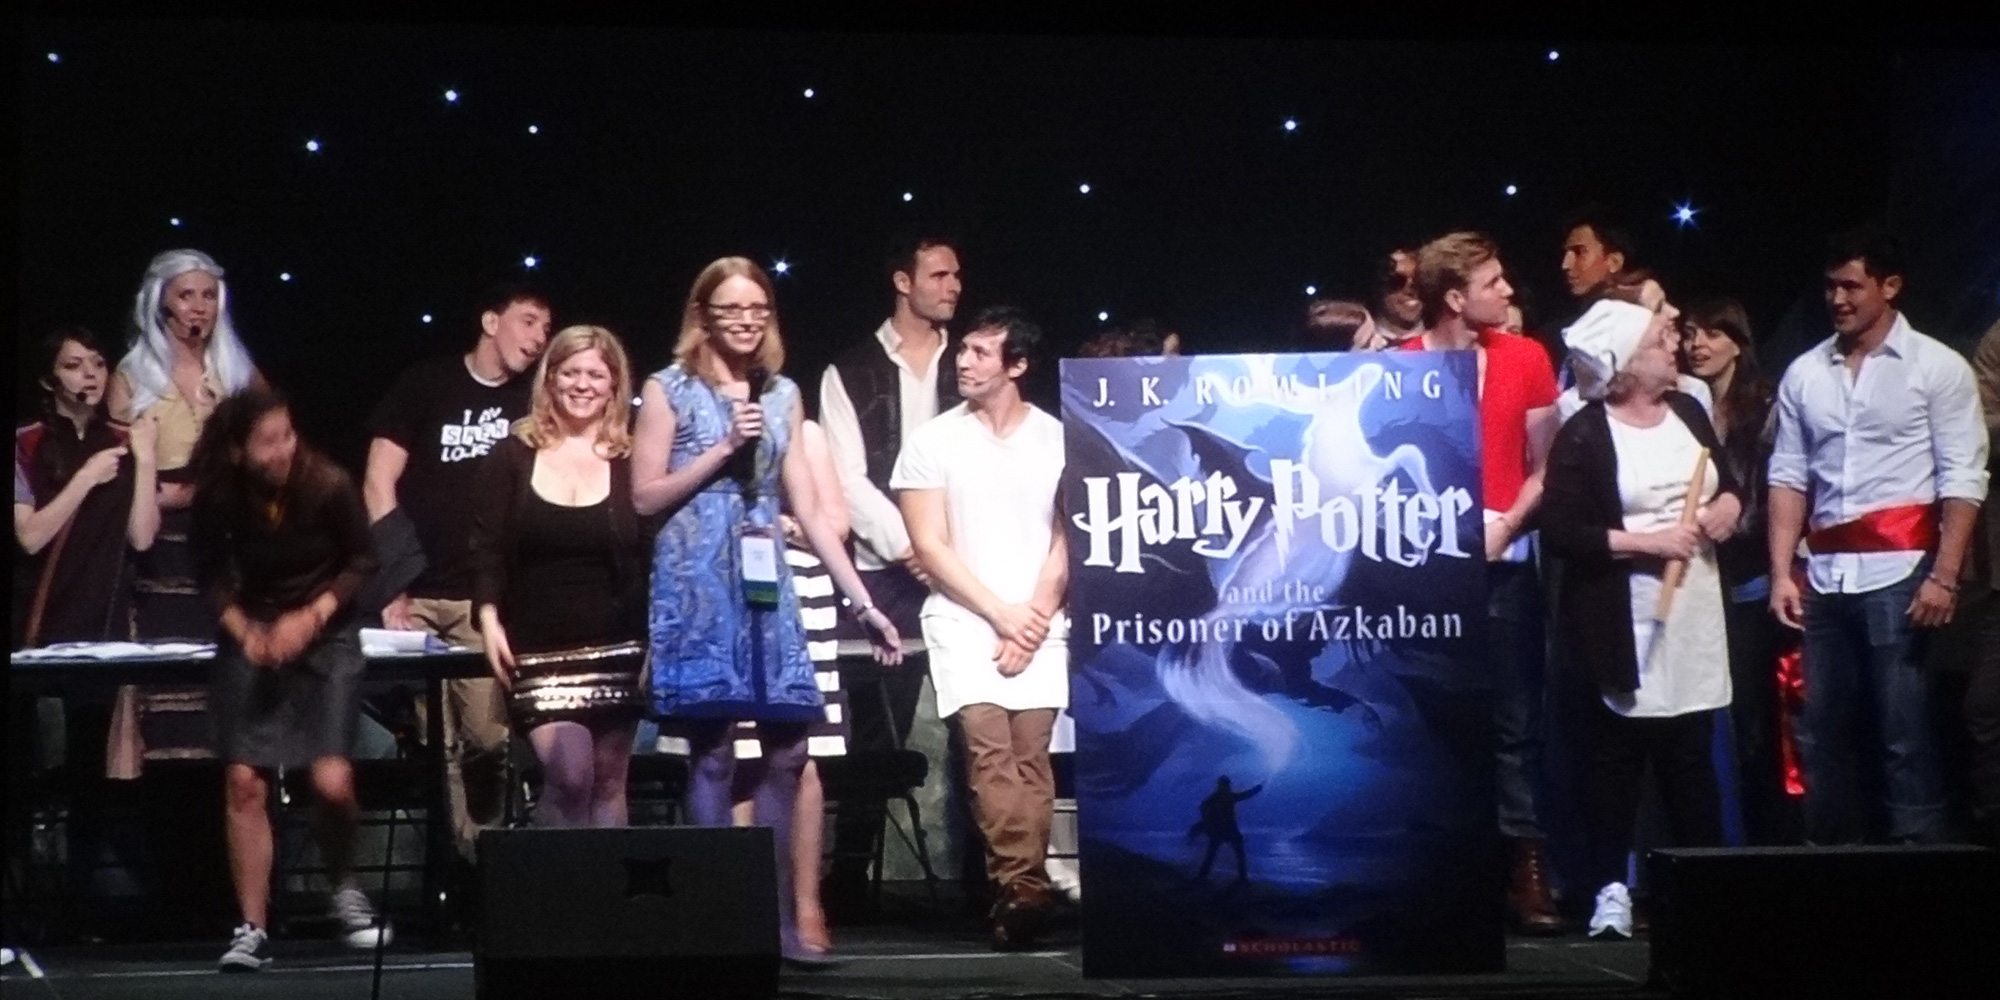 Harry Potter 3 unveiling